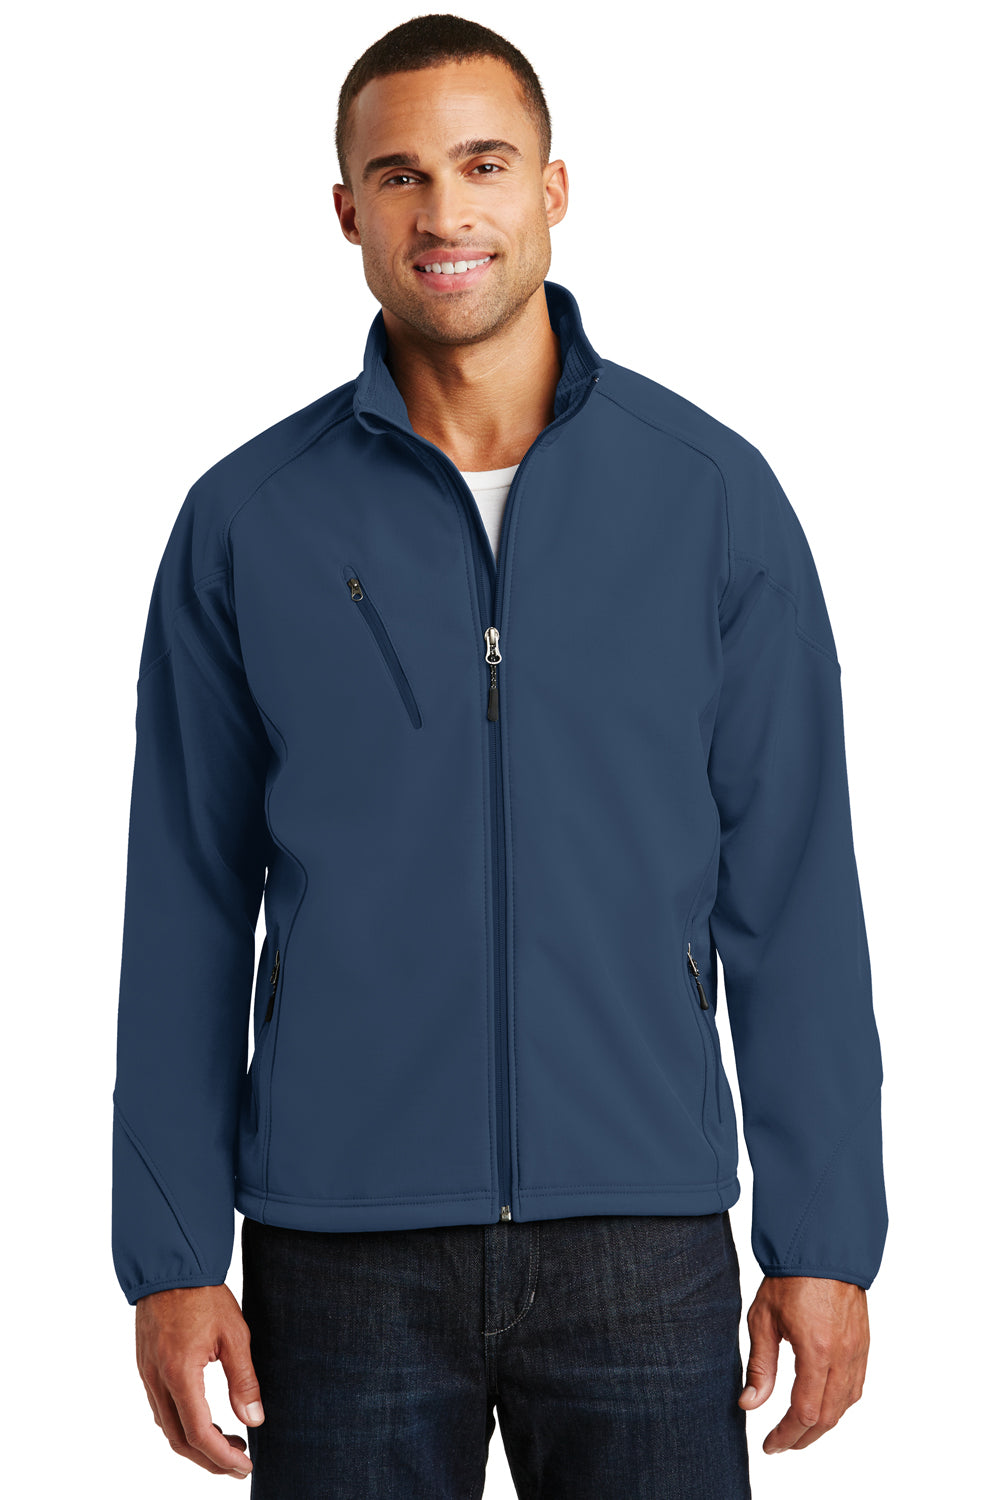 Port Authority J705 Mens Wind & Water Resistant Full Zip Jacket Insignia Blue Front